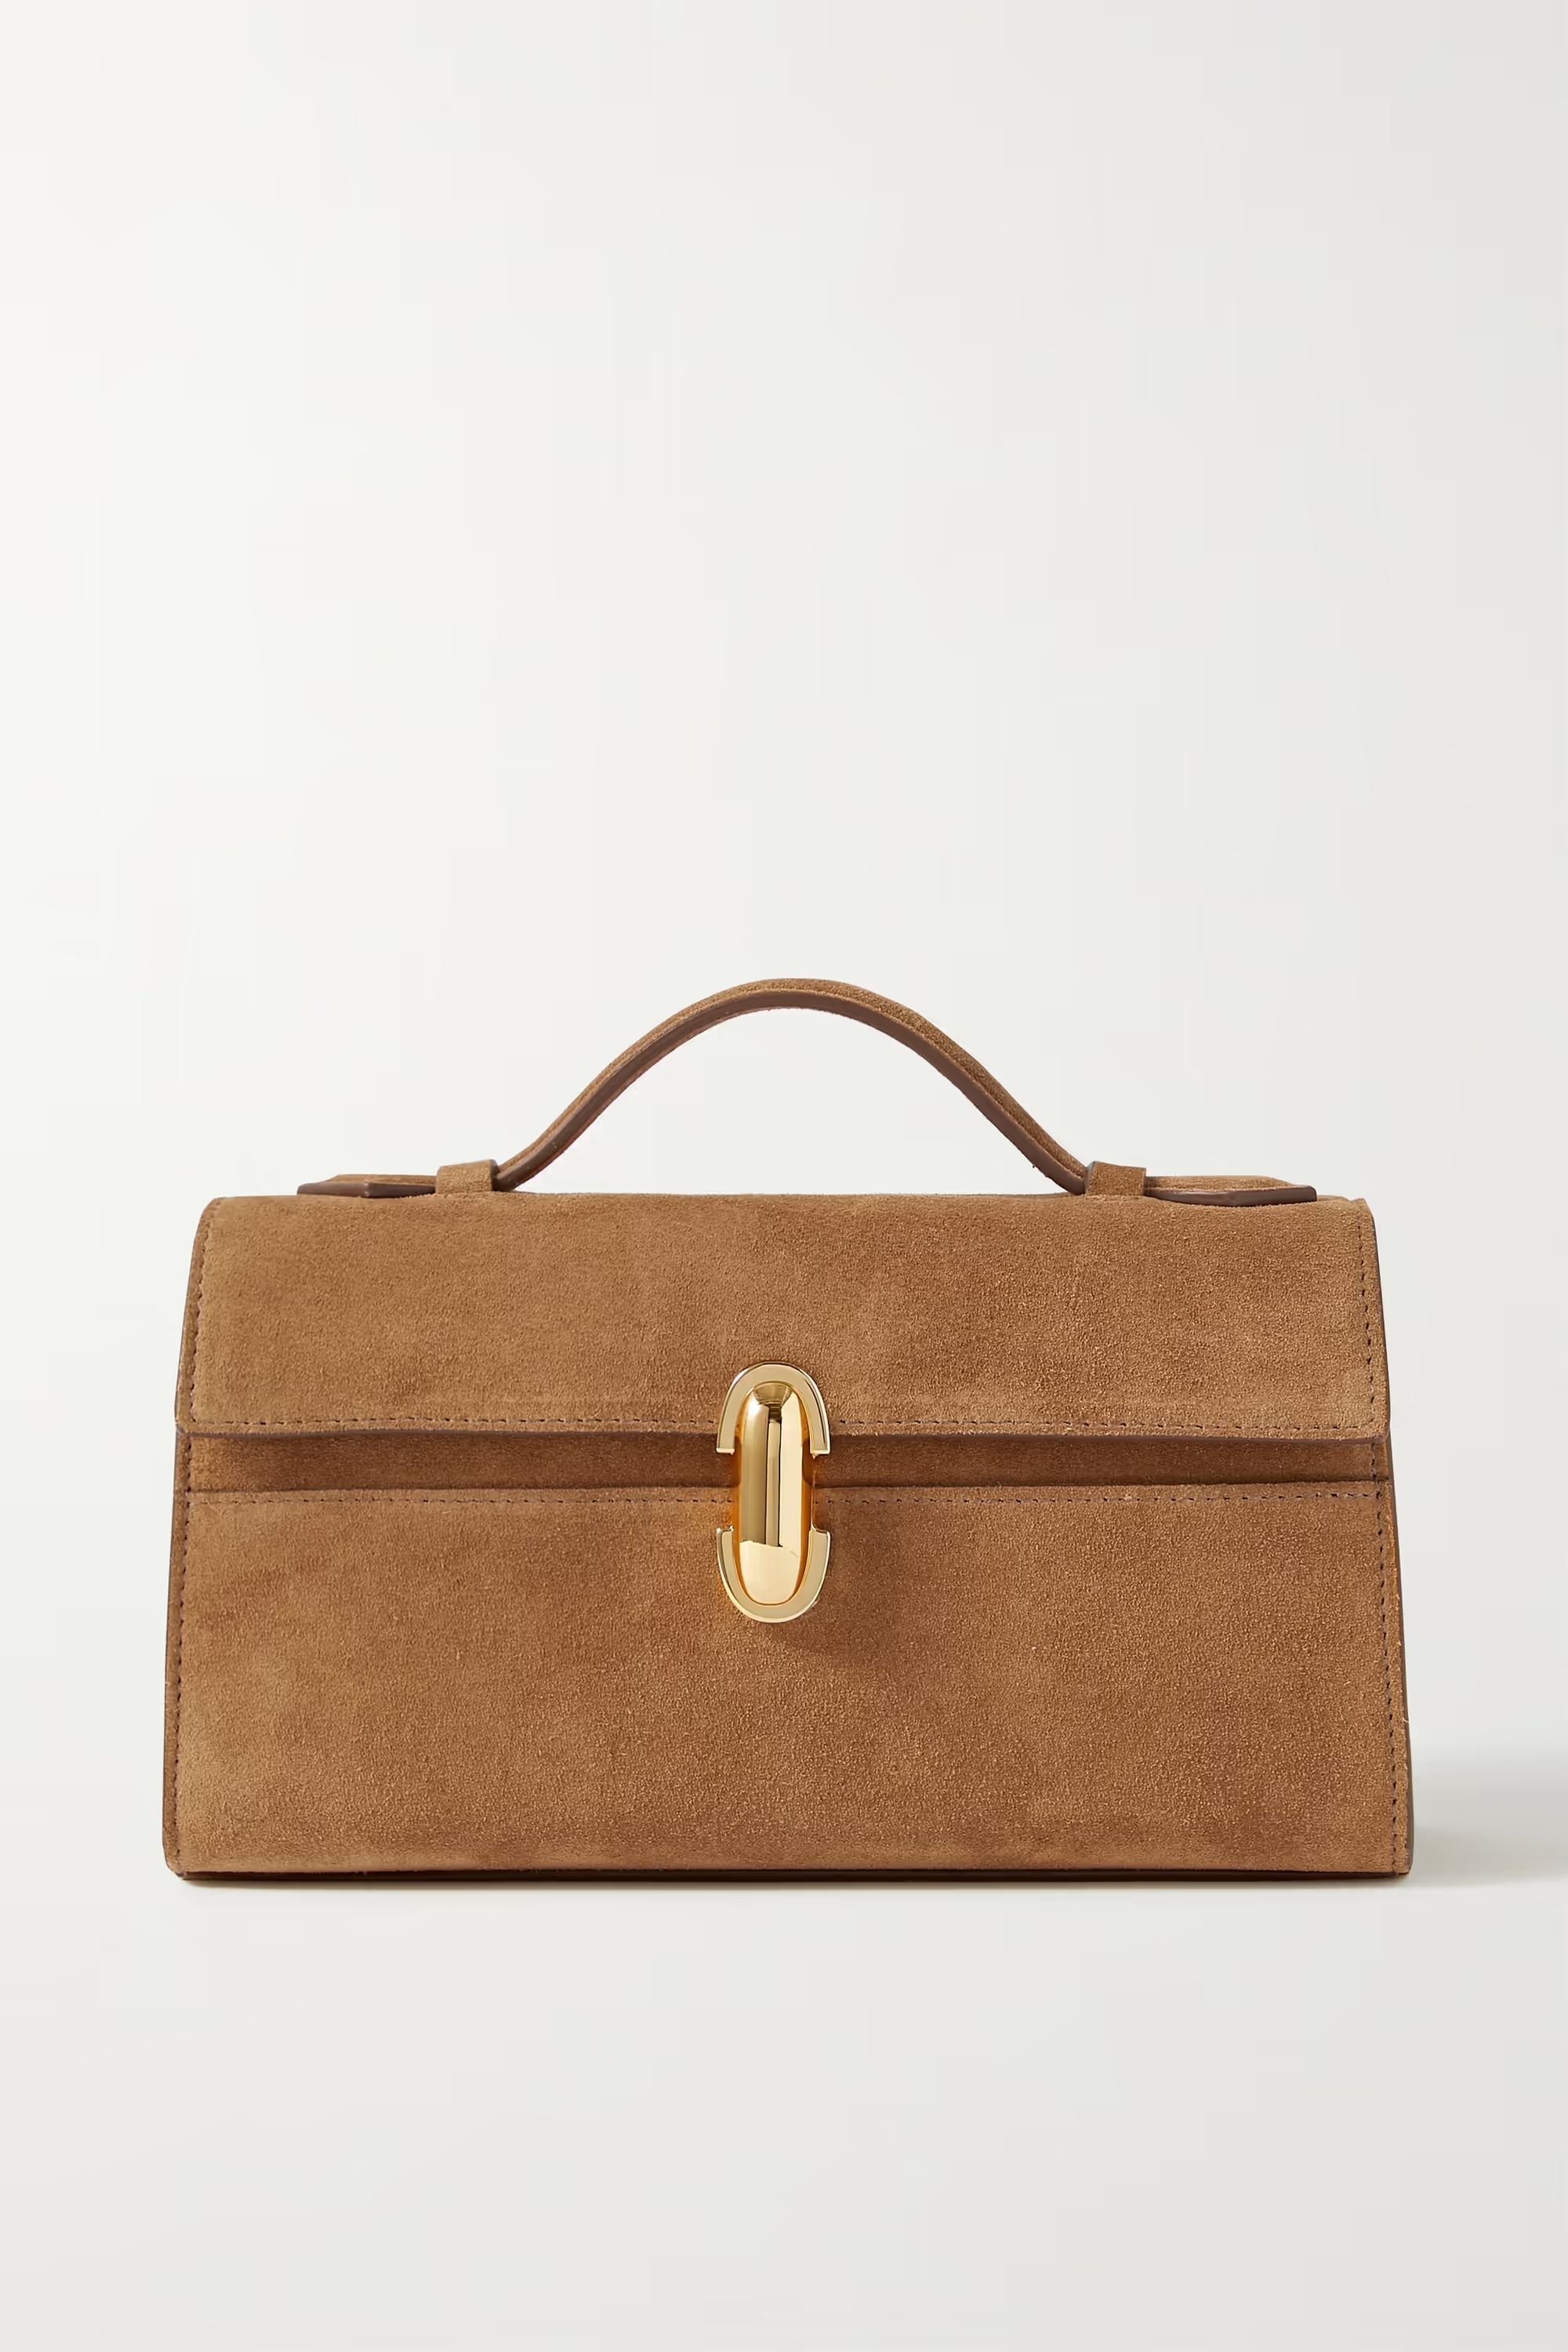 SAVETTESymmetry Pochette suede tote | NET-A-PORTER (US)